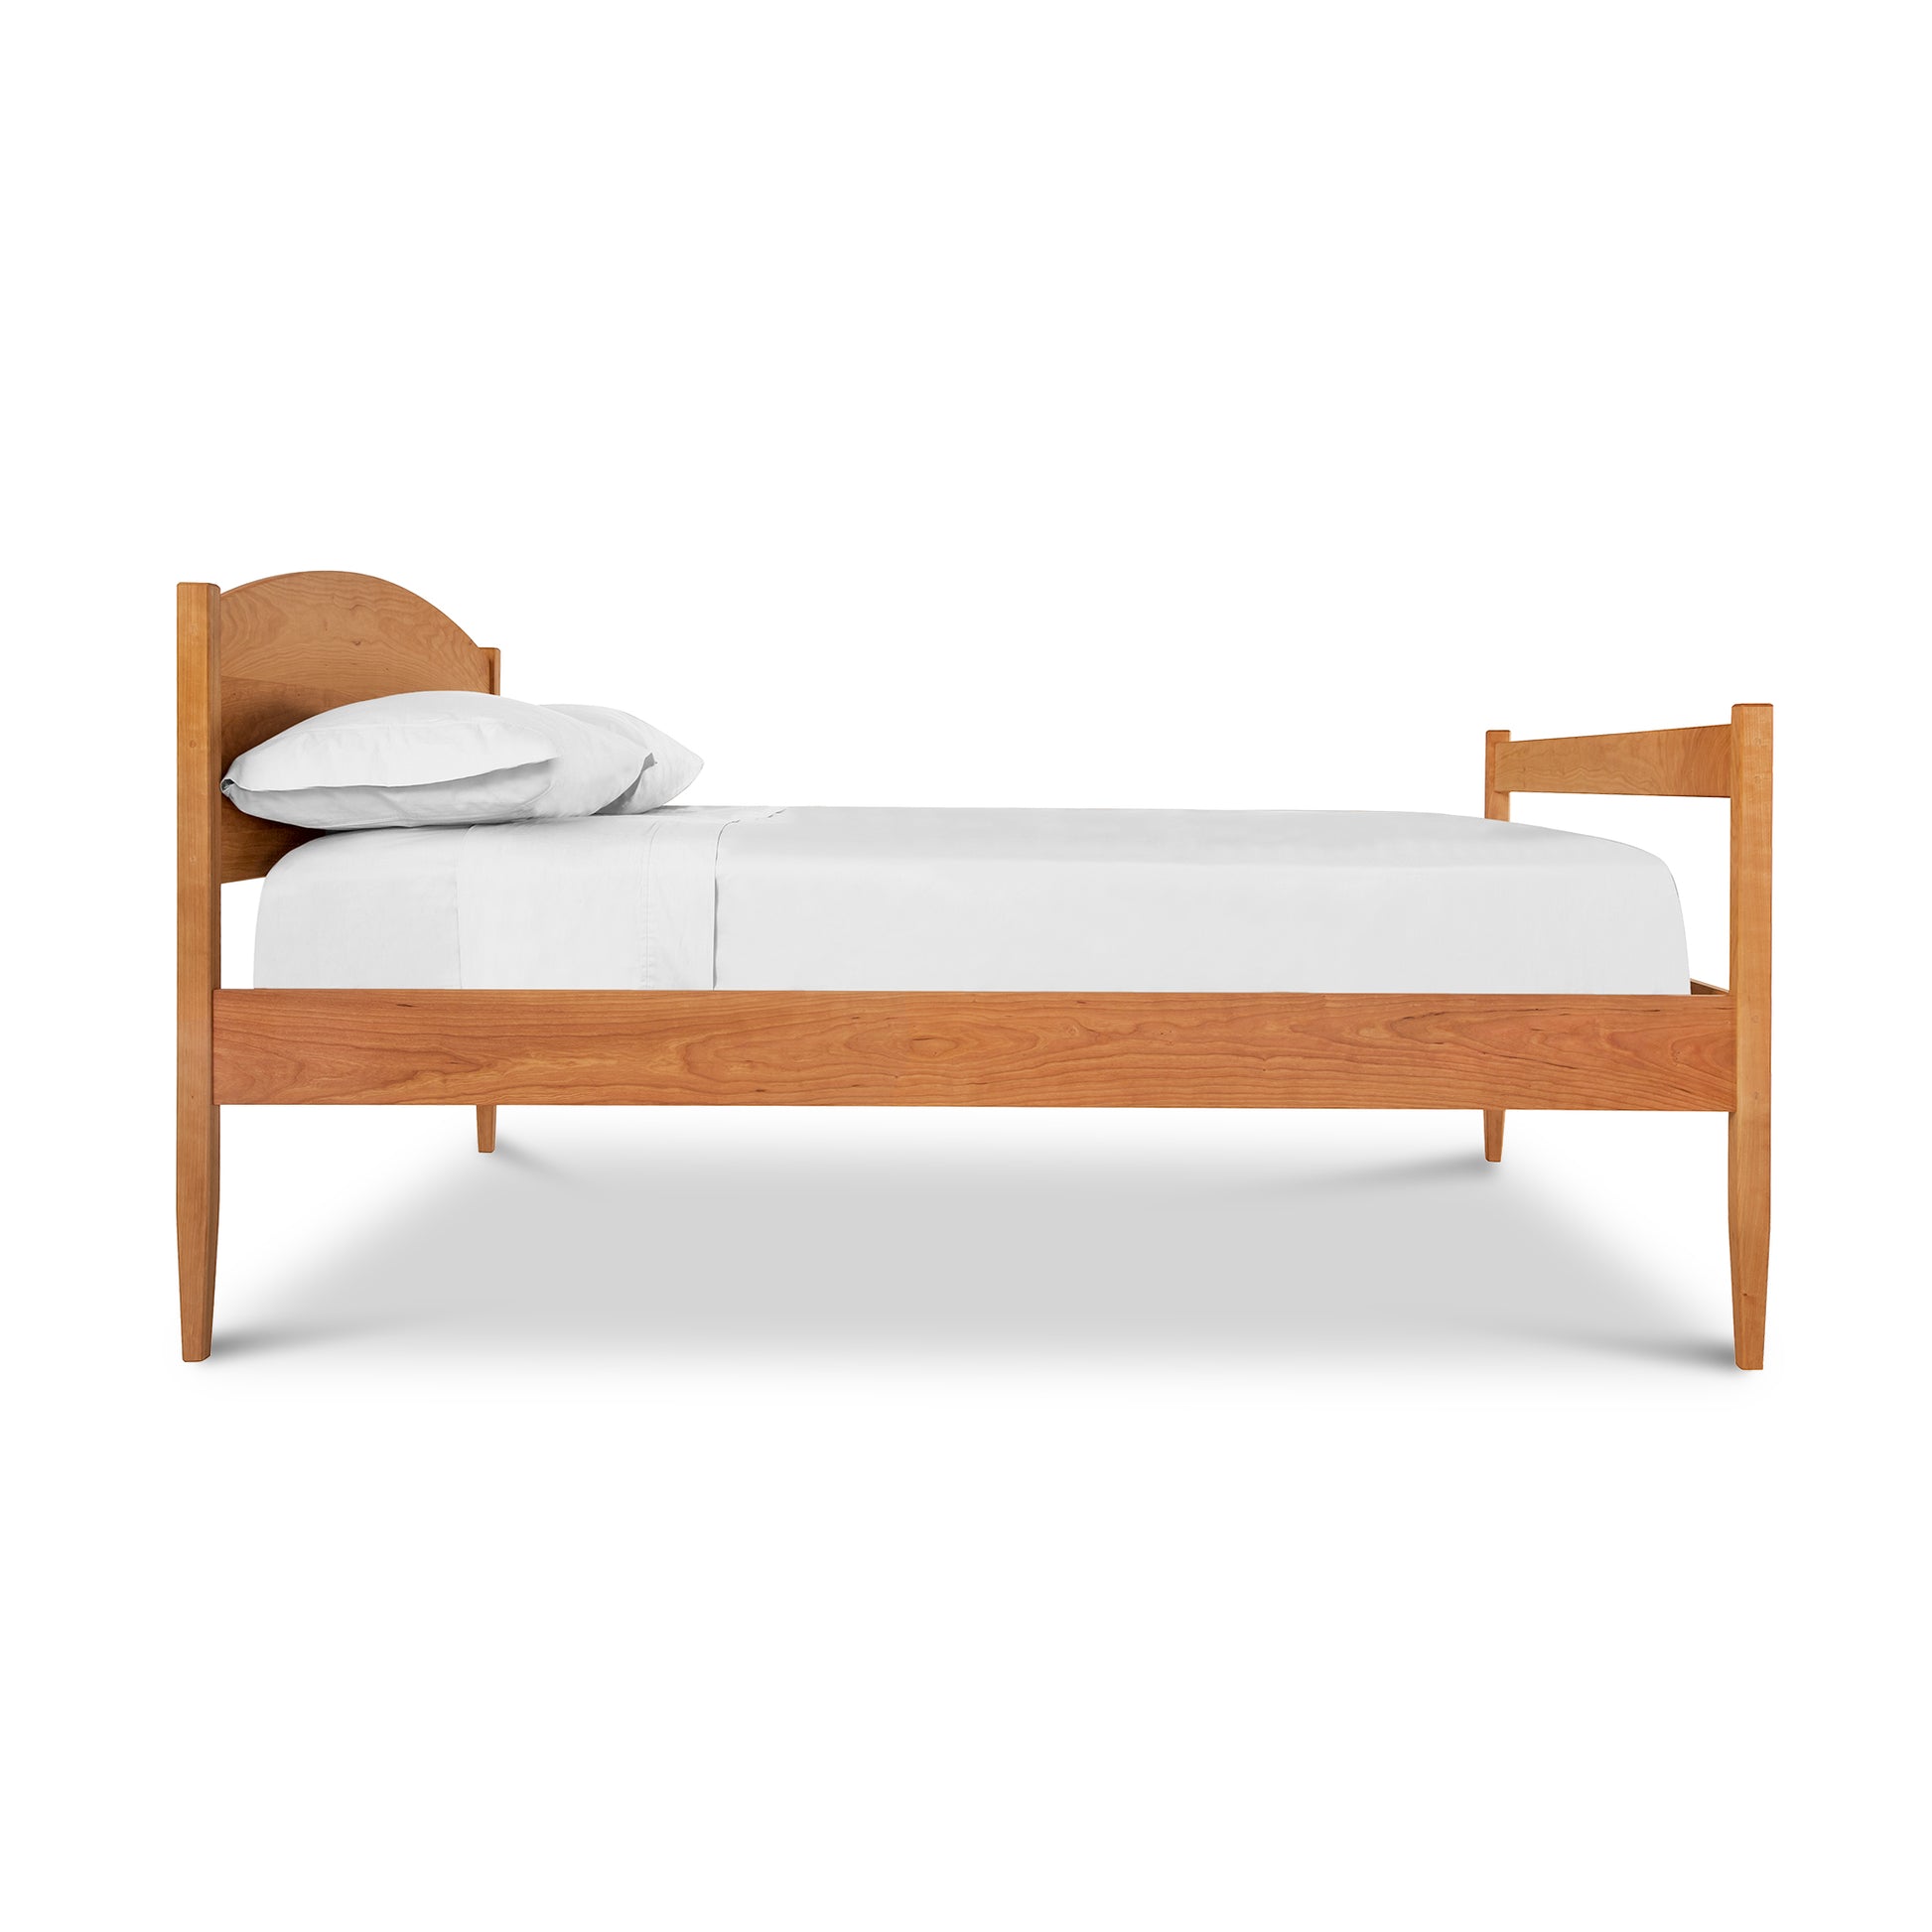 A wooden bed with a white sheet on it.